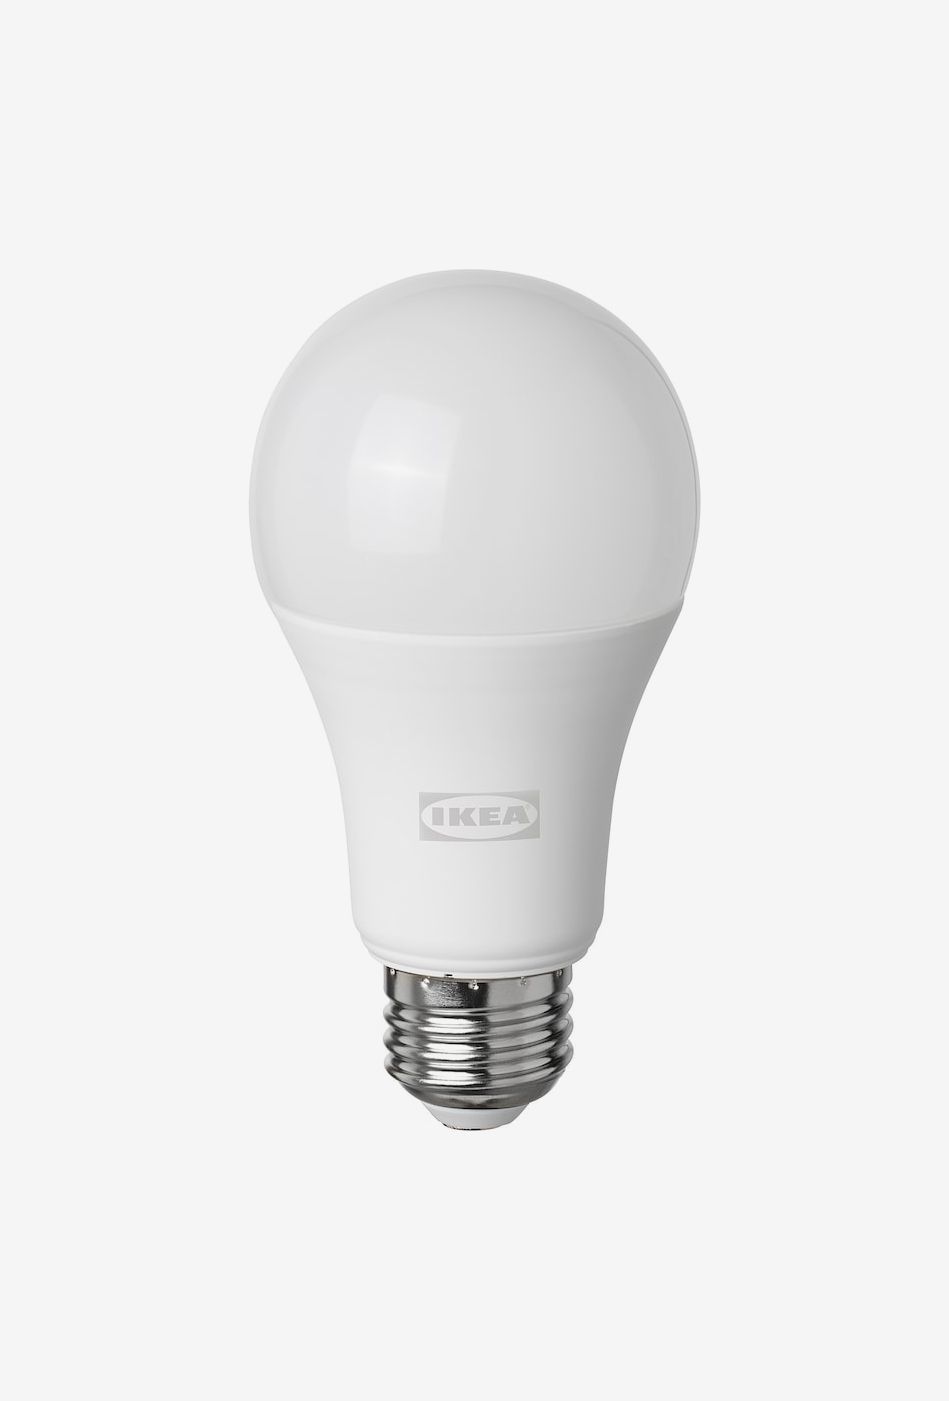 Dimmable LED Bulbs, Premium Brands